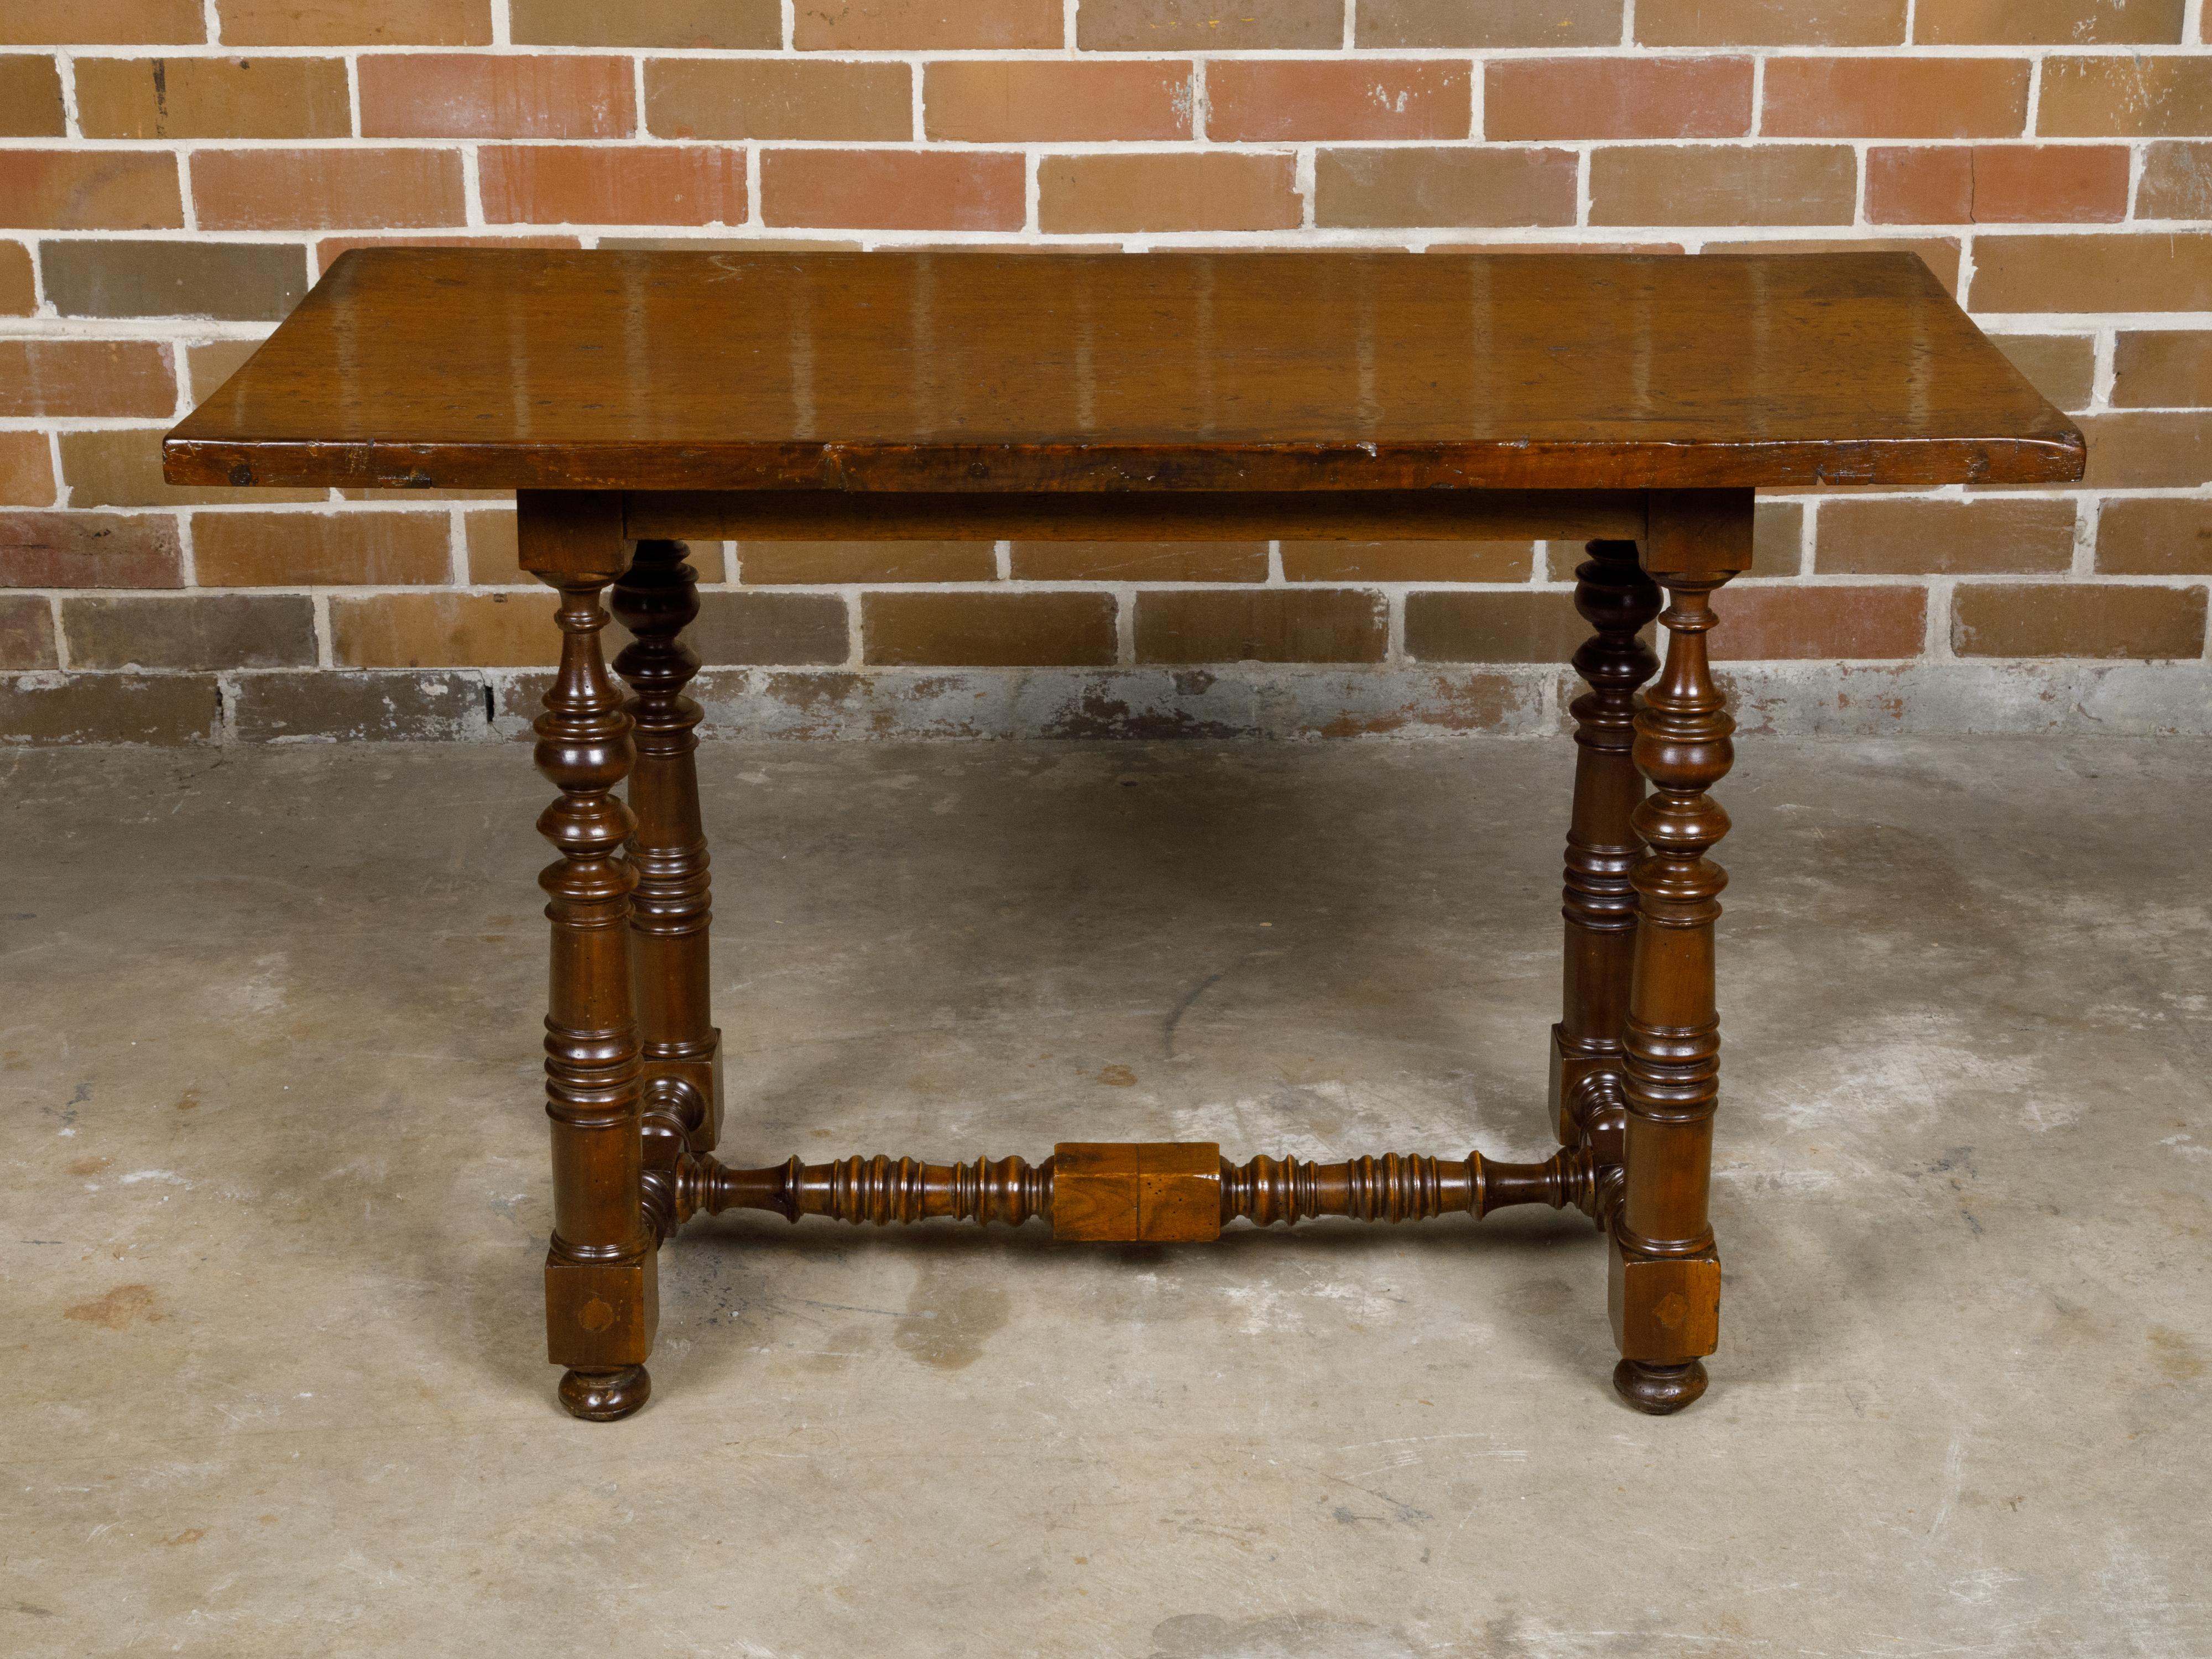 Italian 1800s Walnut Baroque Style Spool Table with H-Form Cross Stretcher For Sale 4